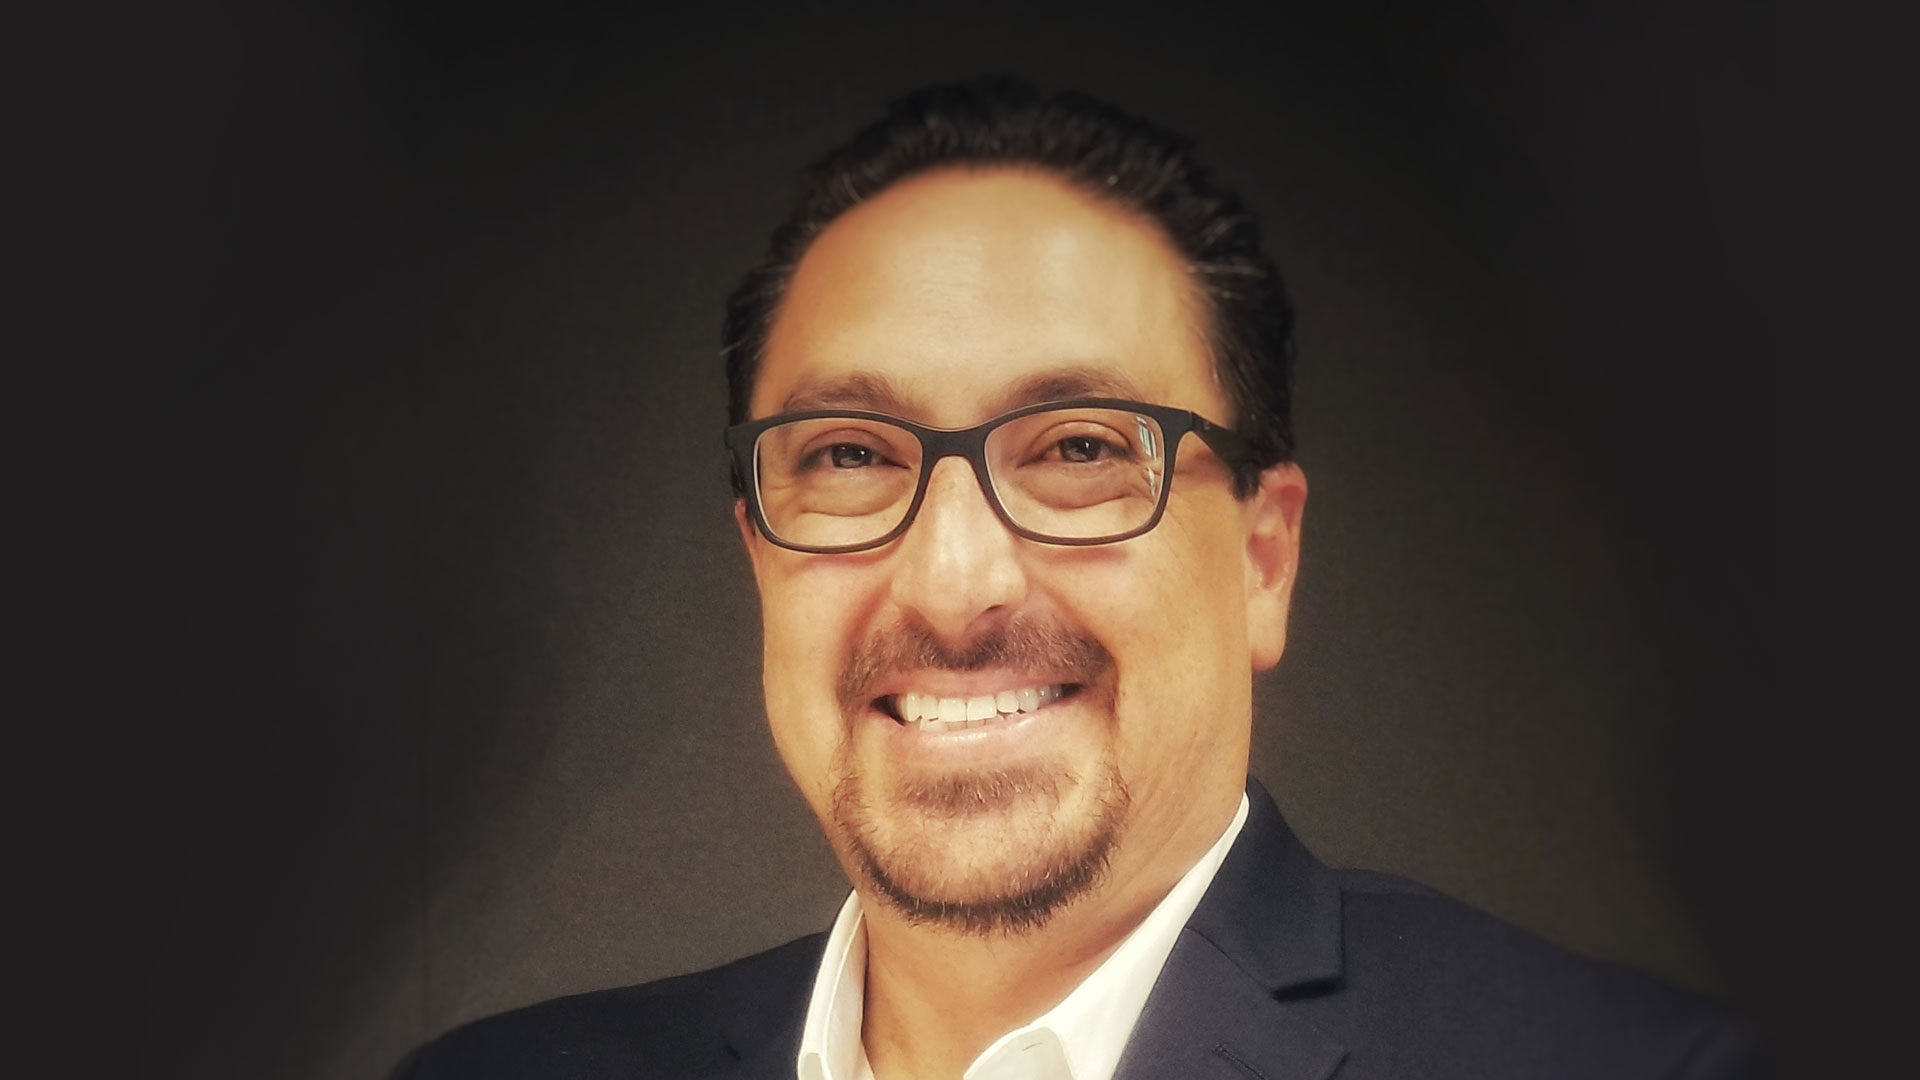 Chris Medina Joins Clovity as Chief Strategy Officer (CSO), Solidifies its Leadership and Advisory Board and Strengthens its Footprint in IoT, Big Data & Cloud Solutions